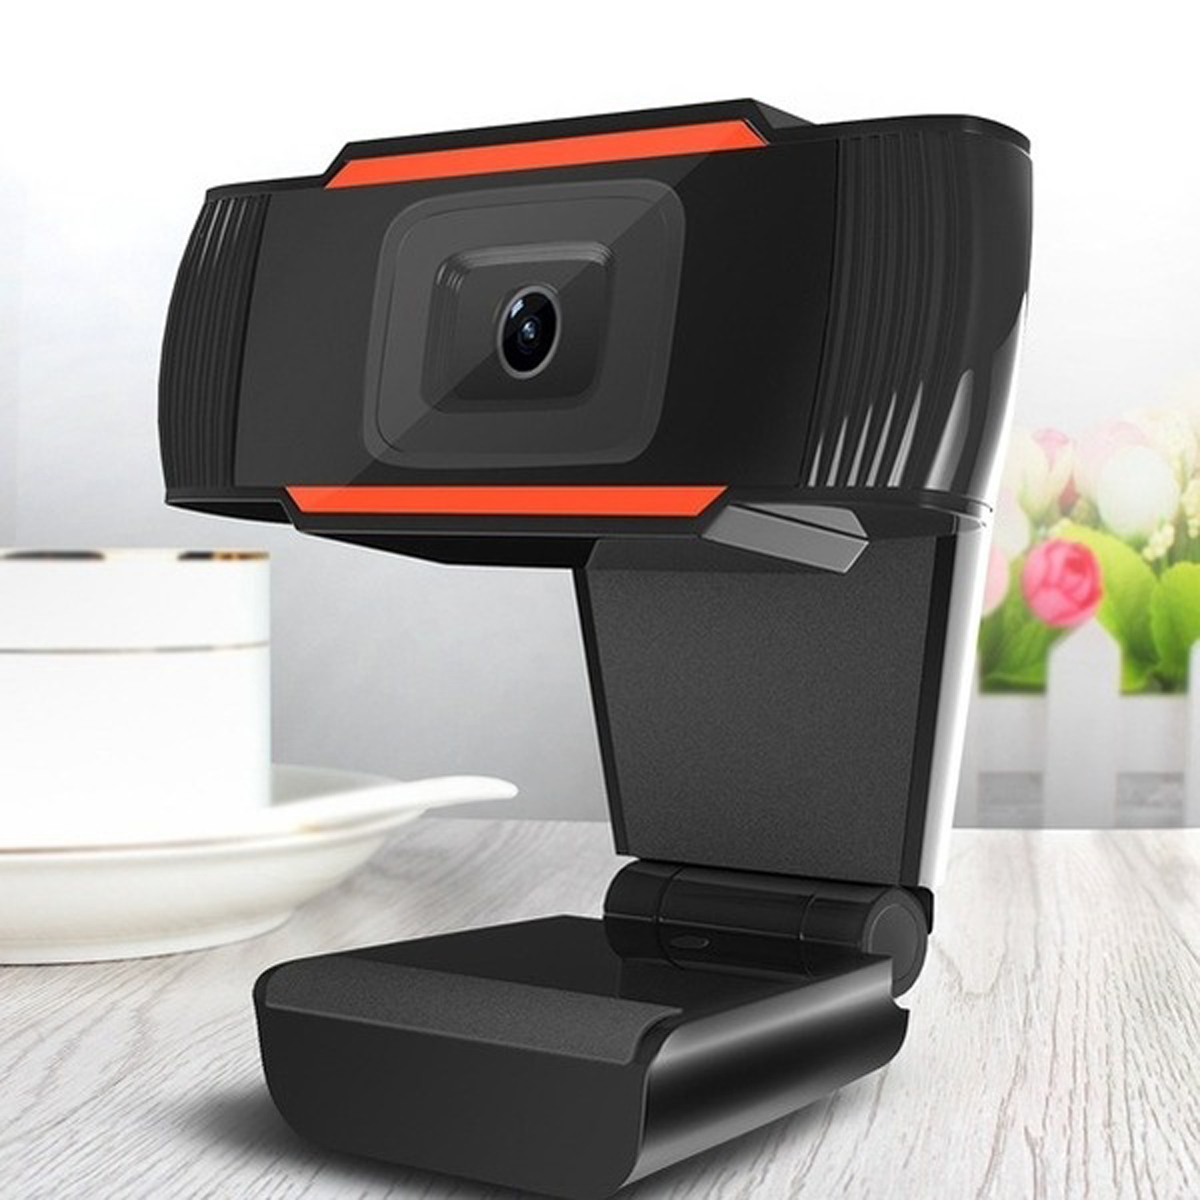 HD-Webcam-Auto-Focus-PC-Web-USB-Camera-Video-Conference-Cams-with-Microphone-1724733-7